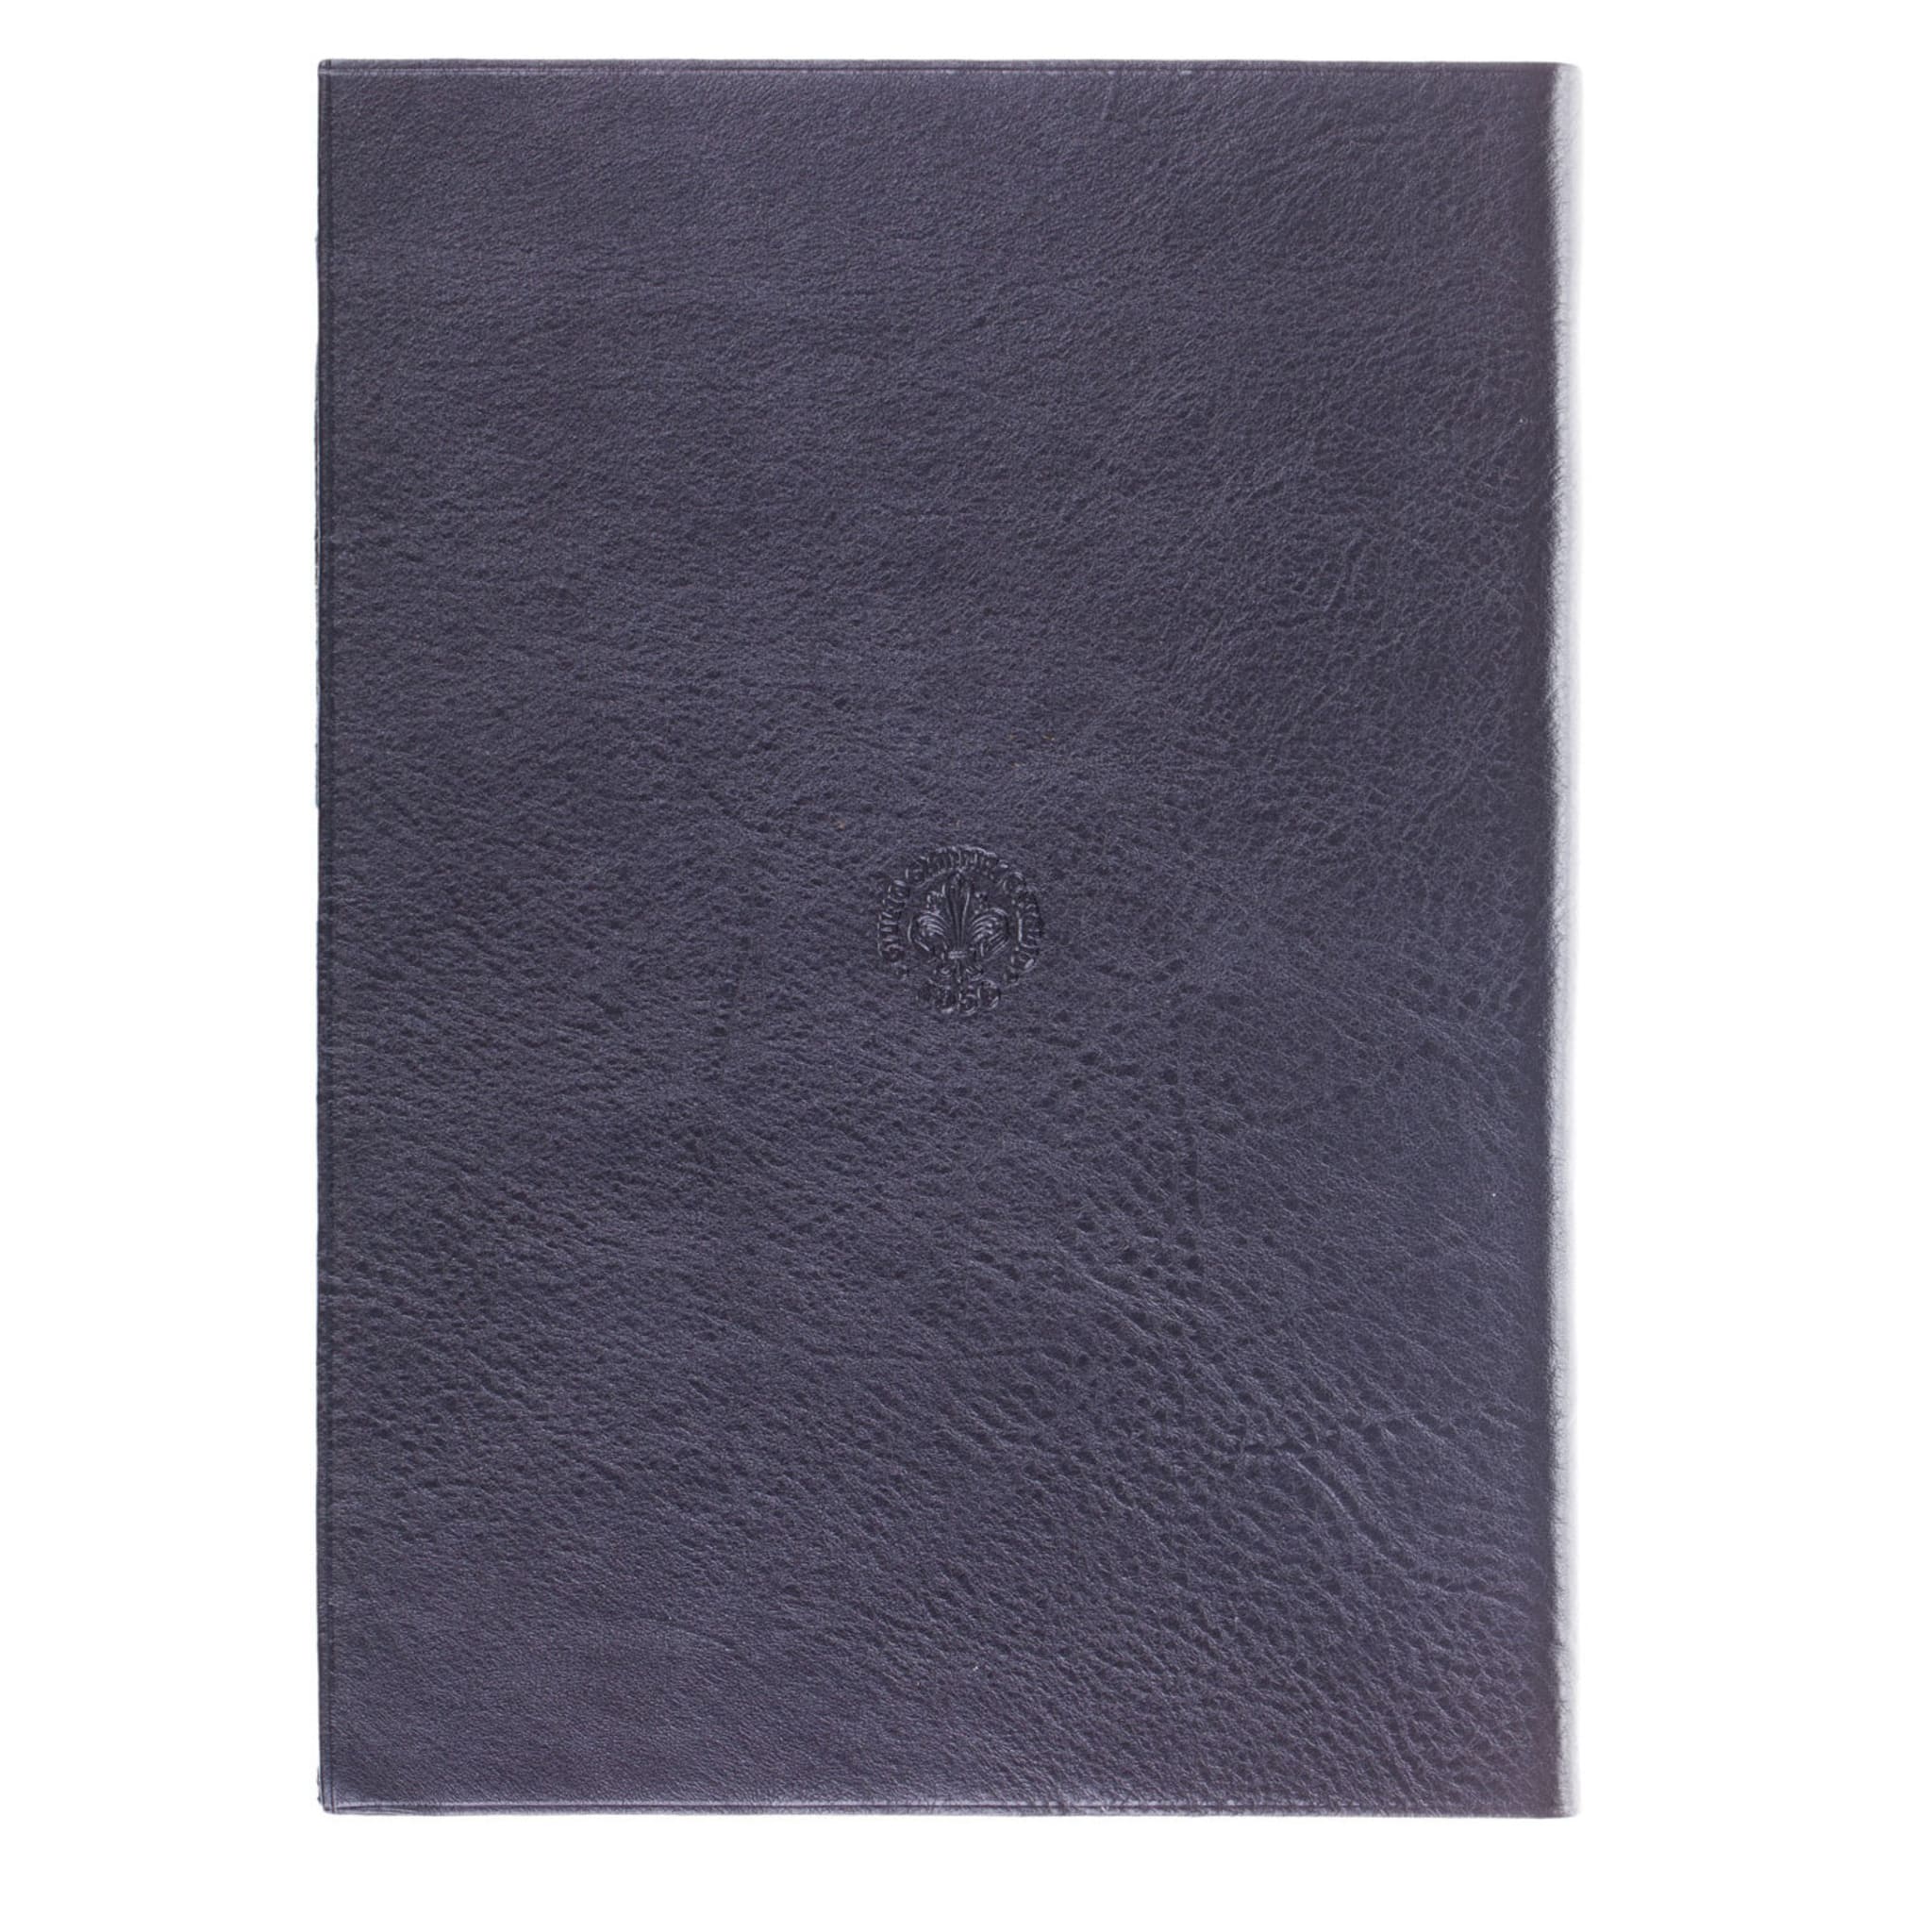 Lily Black Leather Notebook - Alternative view 3